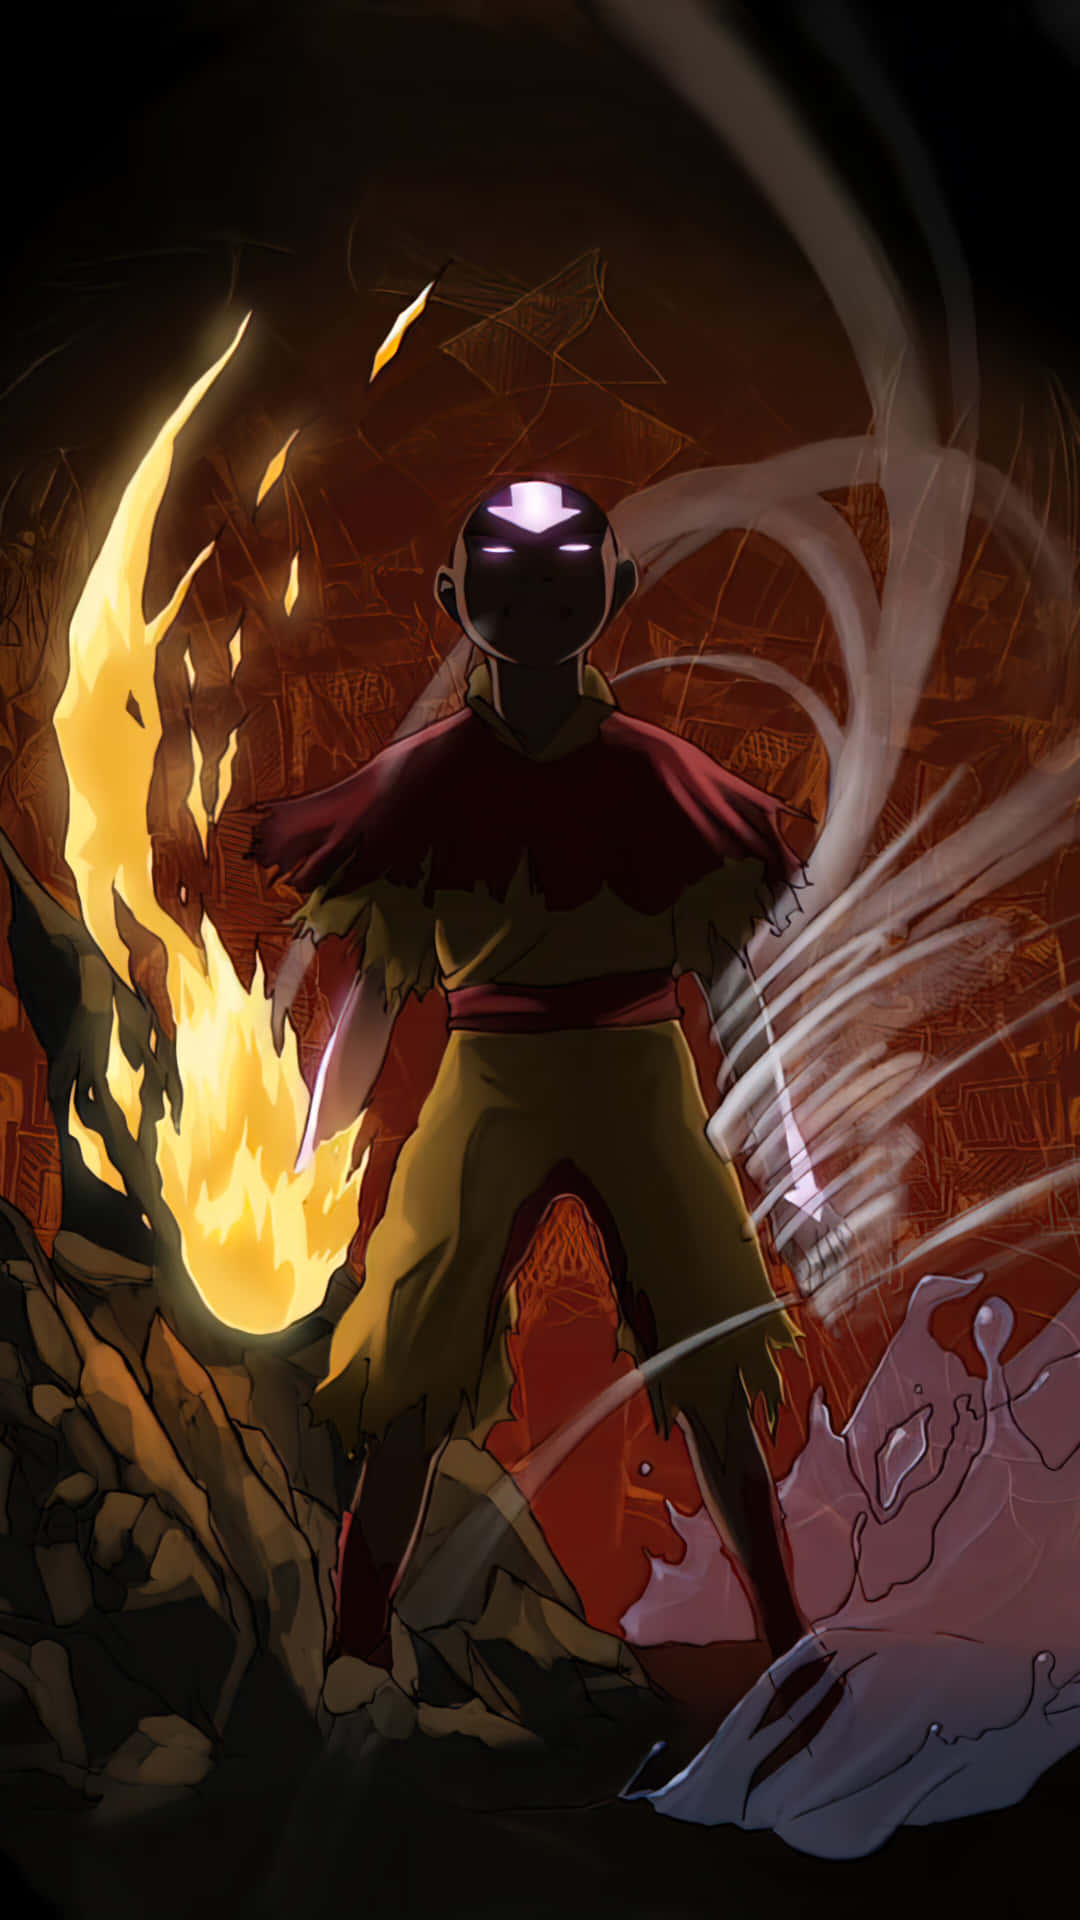 "the Legendary Avatar Aang: The Master Of All Four Elements" Wallpaper